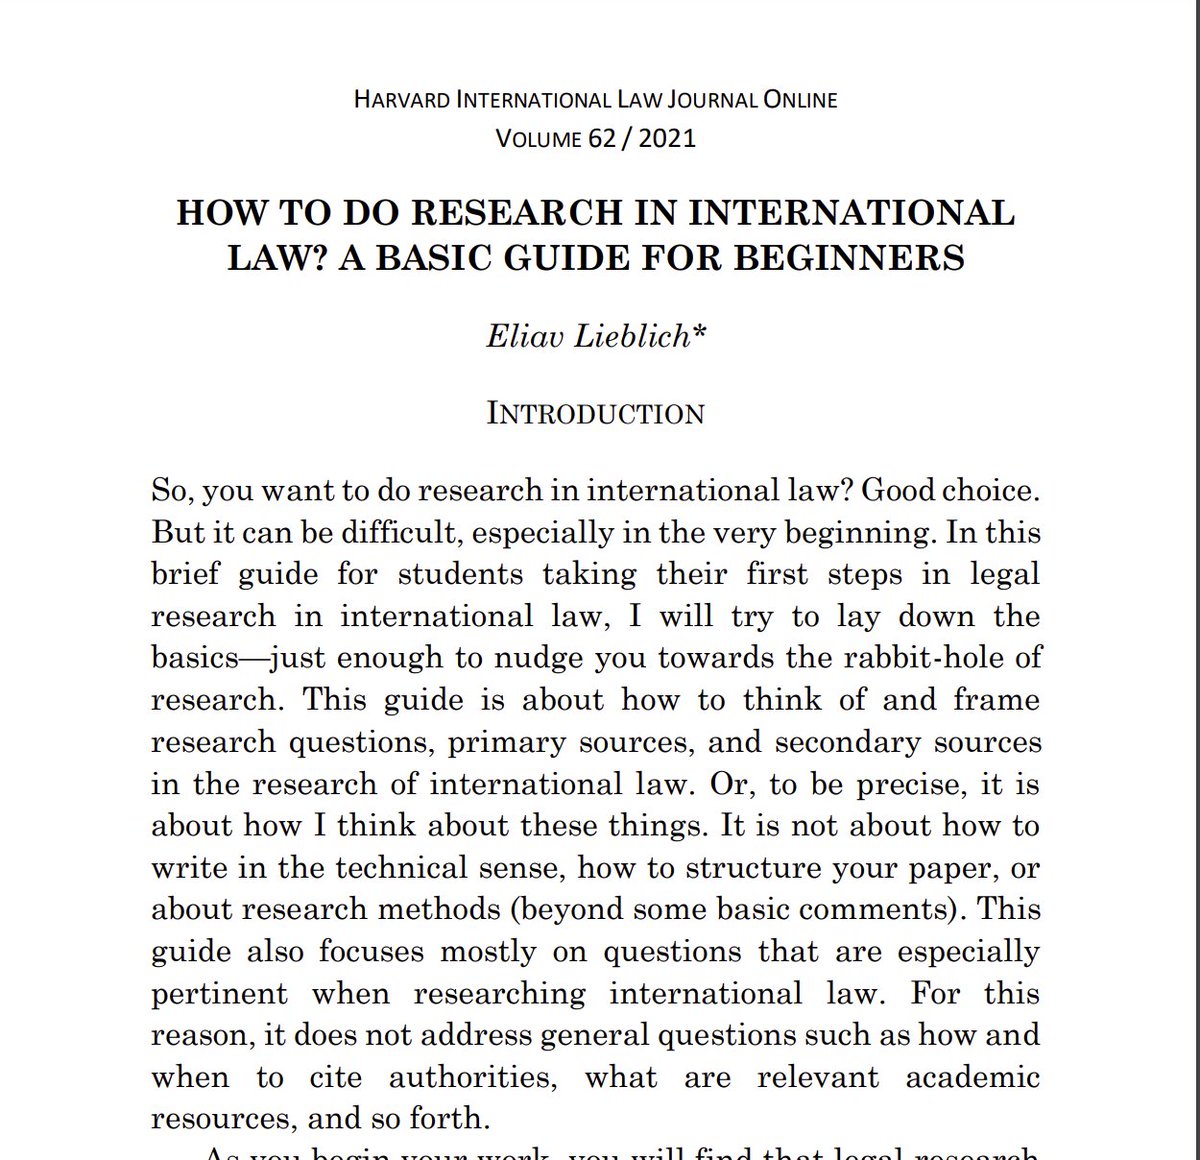 For those of you starting the school year, here's the annual bump of my basic guide about research in international law :) Download here: papers.ssrn.com/sol3/papers.cf…